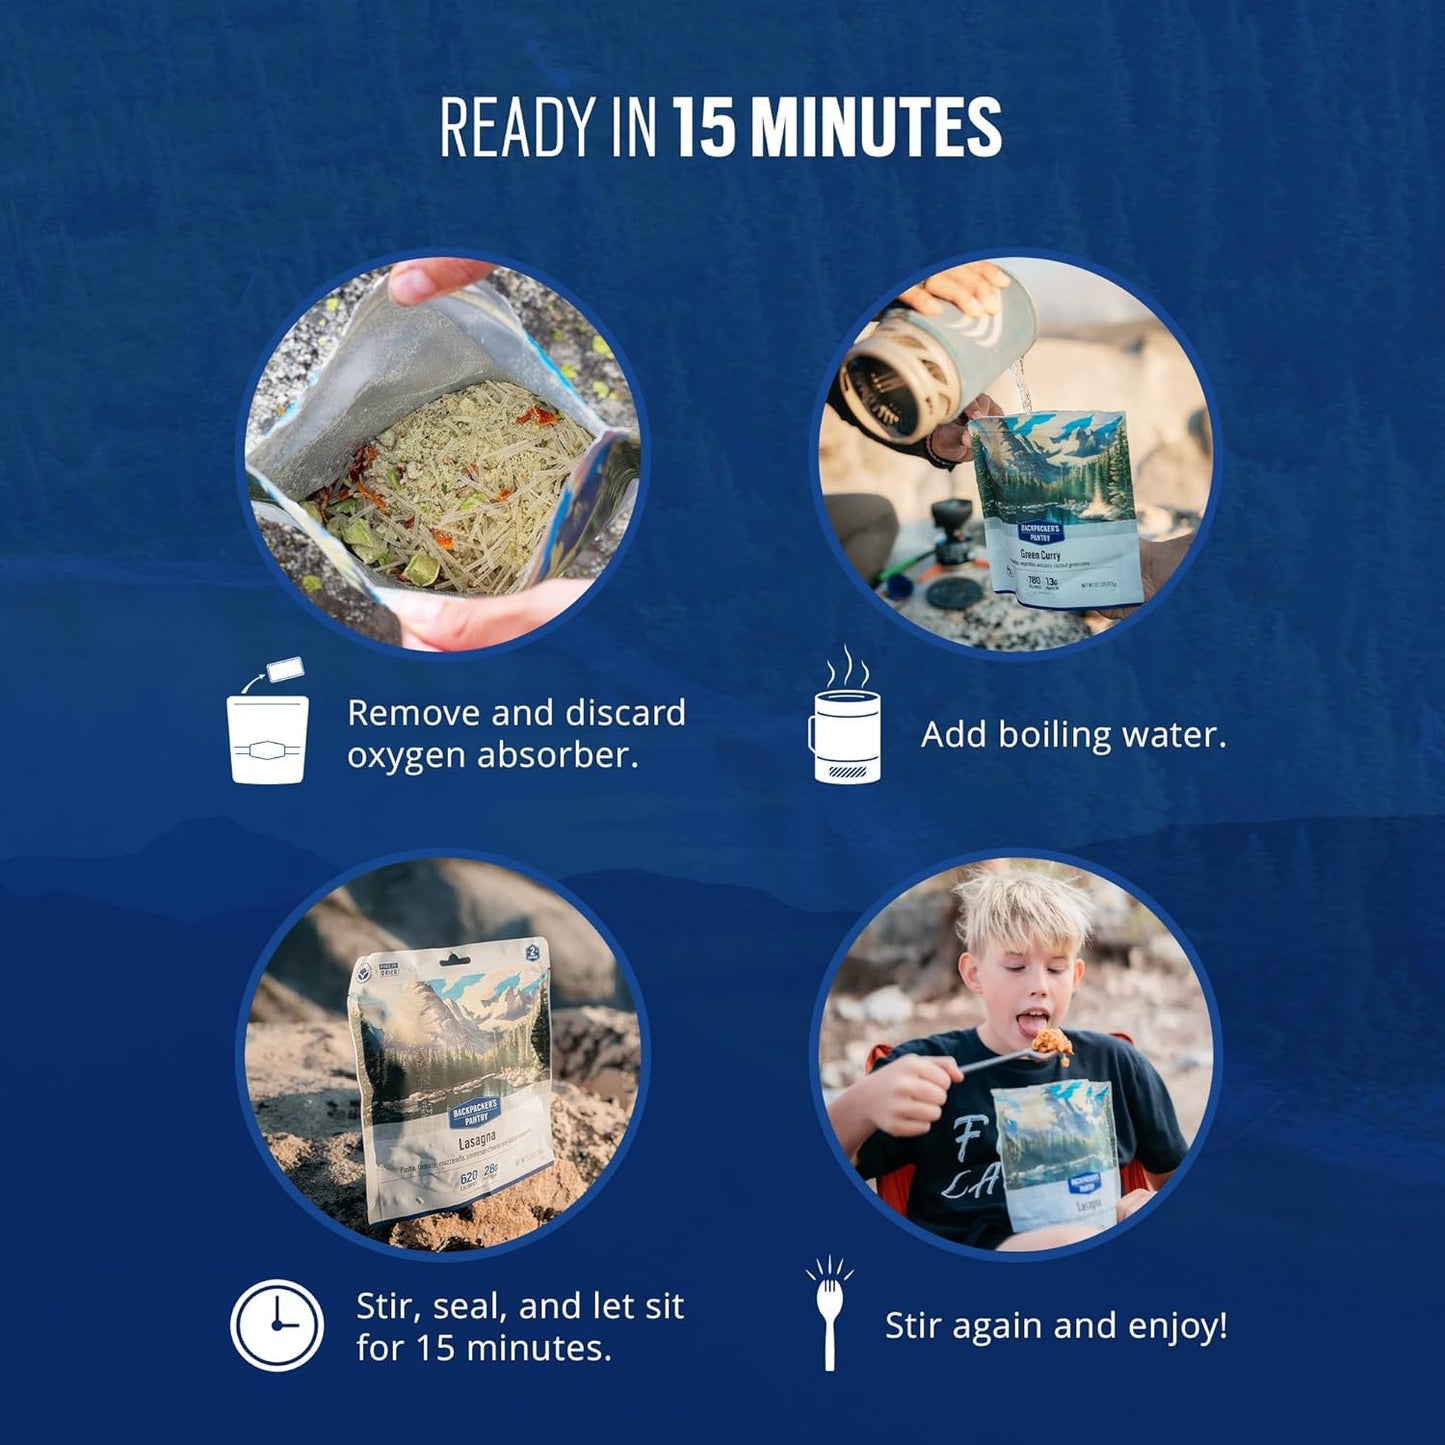 Three Cheese Mac & Cheese - Freeze Dried Backpacking & Camping Food - Emergency Food - 24 Grams of Protein, Vegetarian